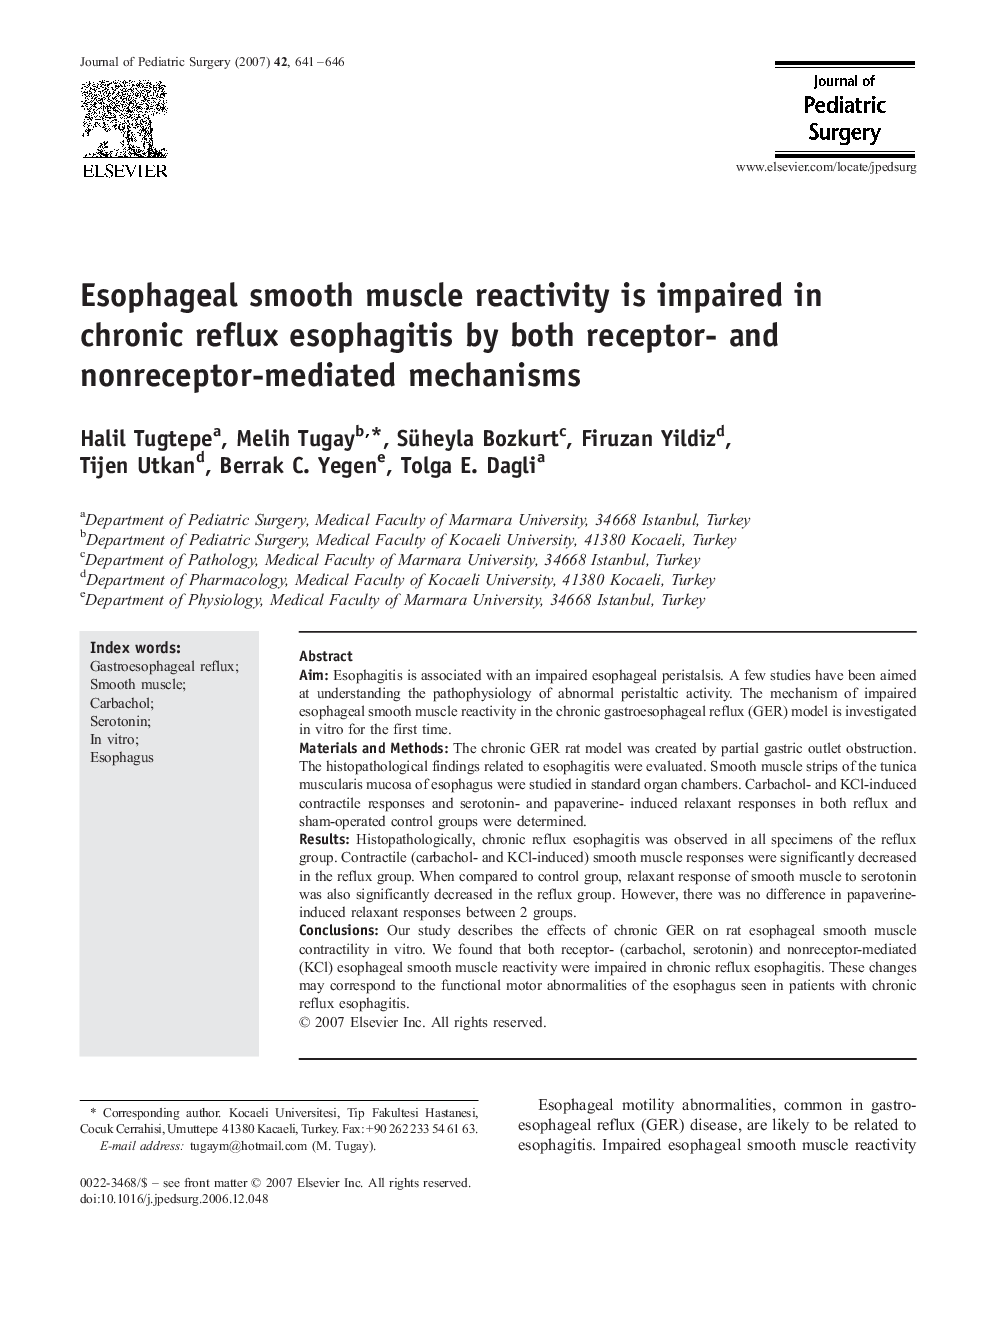 Esophageal smooth muscle reactivity is impaired in chronic reflux esophagitis by both receptor- and nonreceptor-mediated mechanisms